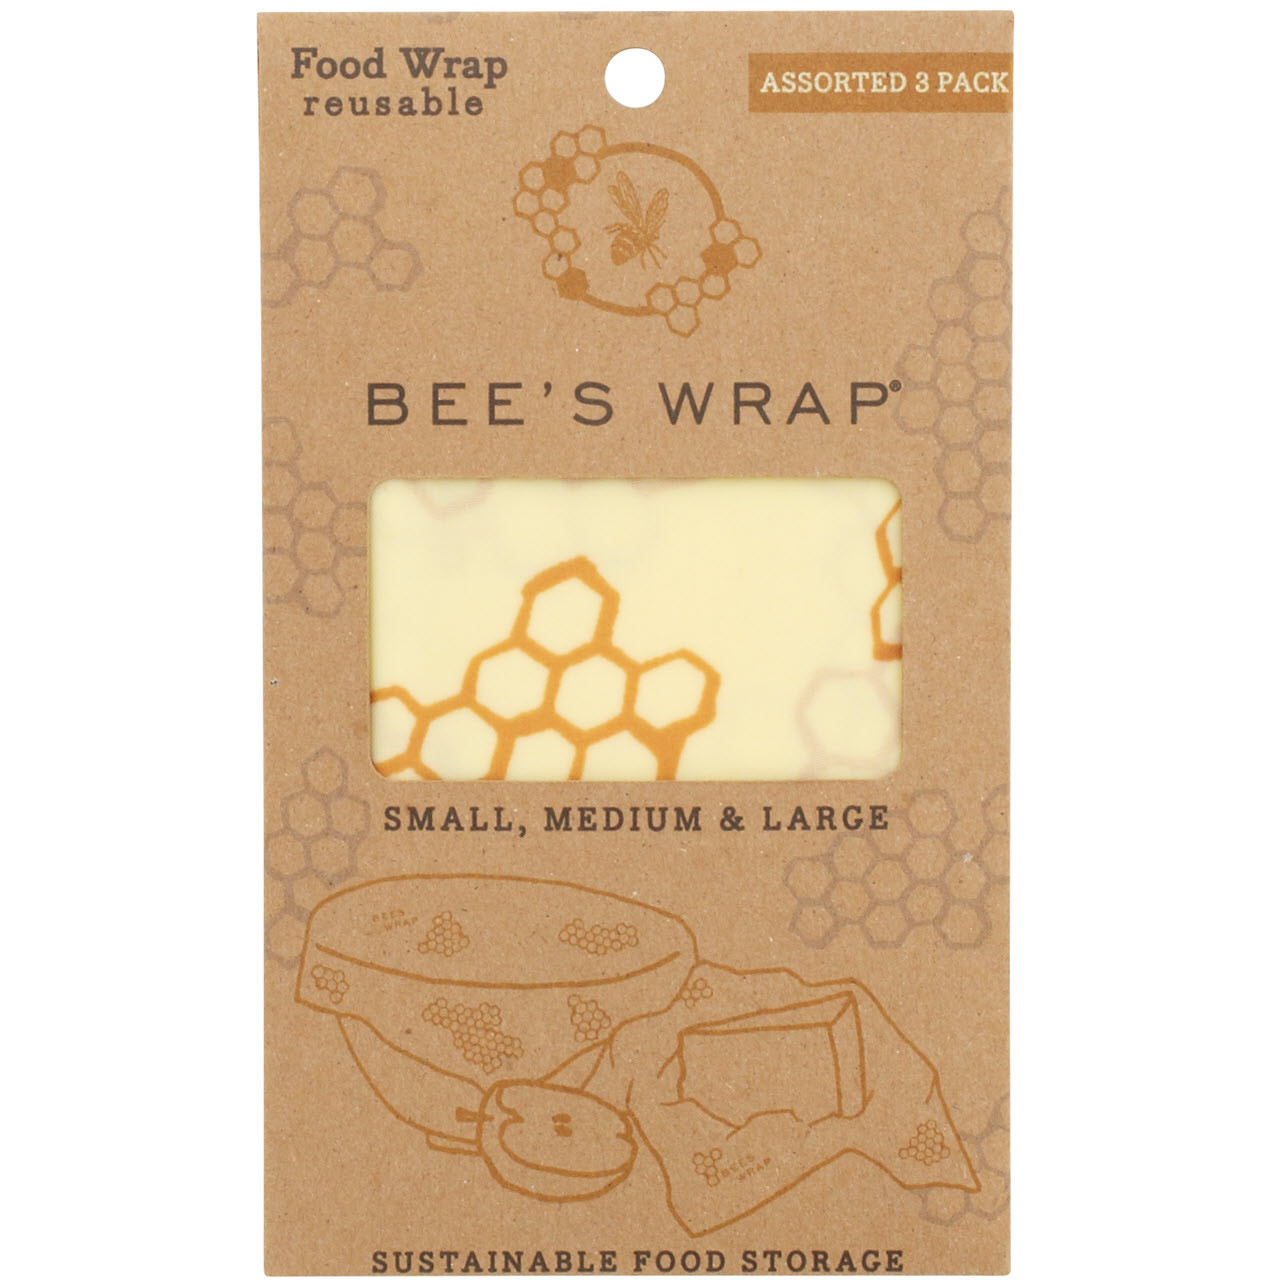 https://cdn11.bigcommerce.com/s-21kj3ntgv1/images/stencil/1280x1280/products/115/448/Bees-Wrap-Honeycomb-Print-Assorted-3pack-in-package__64989.1678151677.jpg?c=2